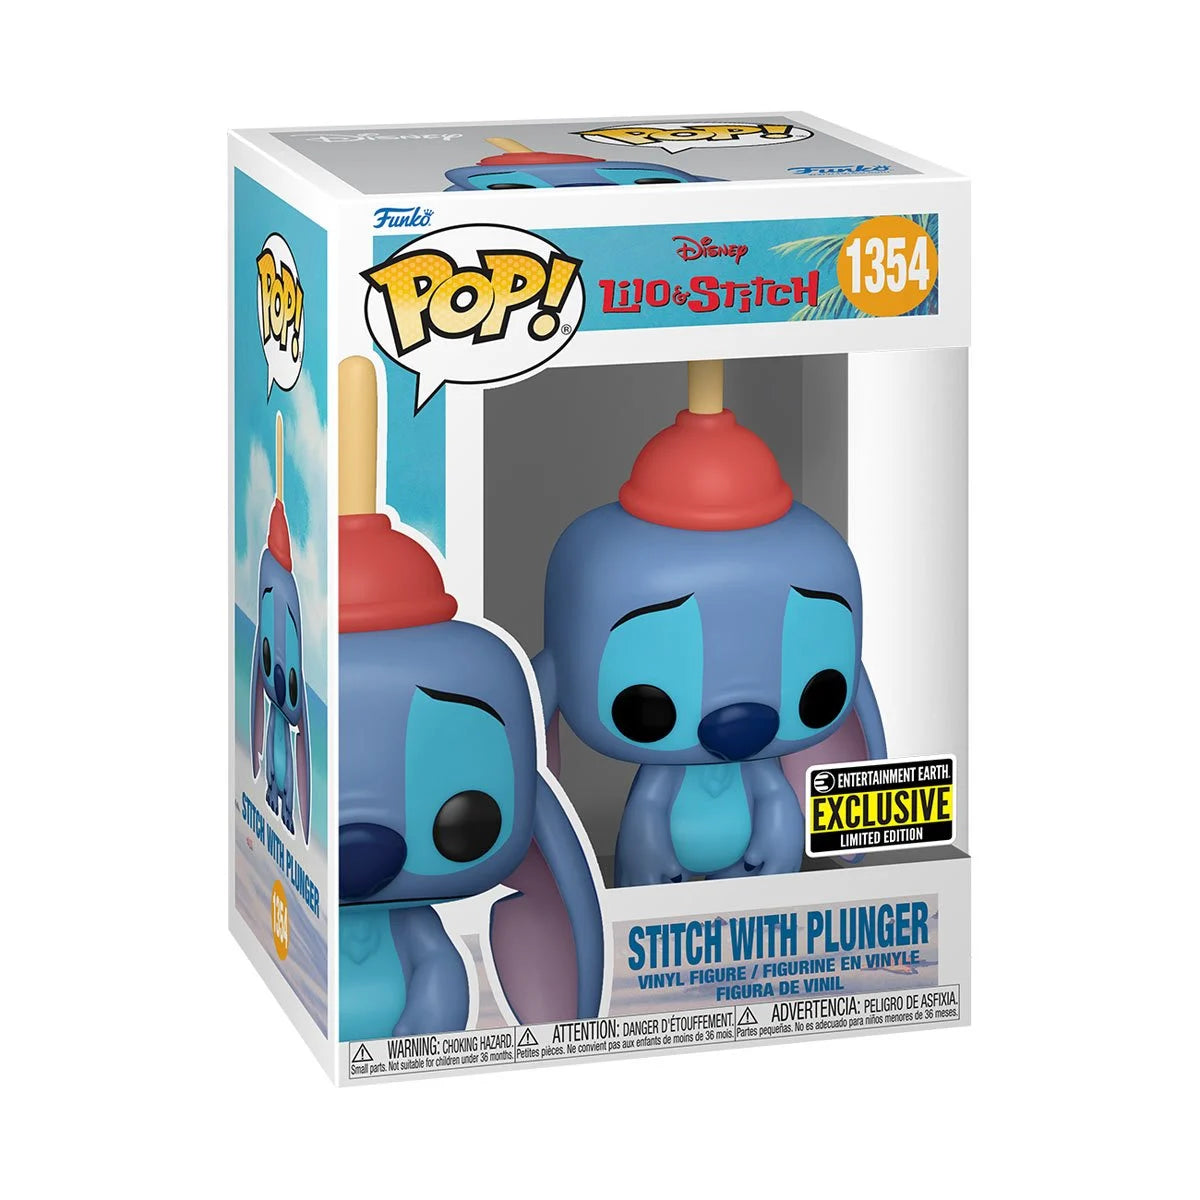 Stitch with Plunger Pop! Vinyl Figure #1354 - Entertainment Earth Exclusive